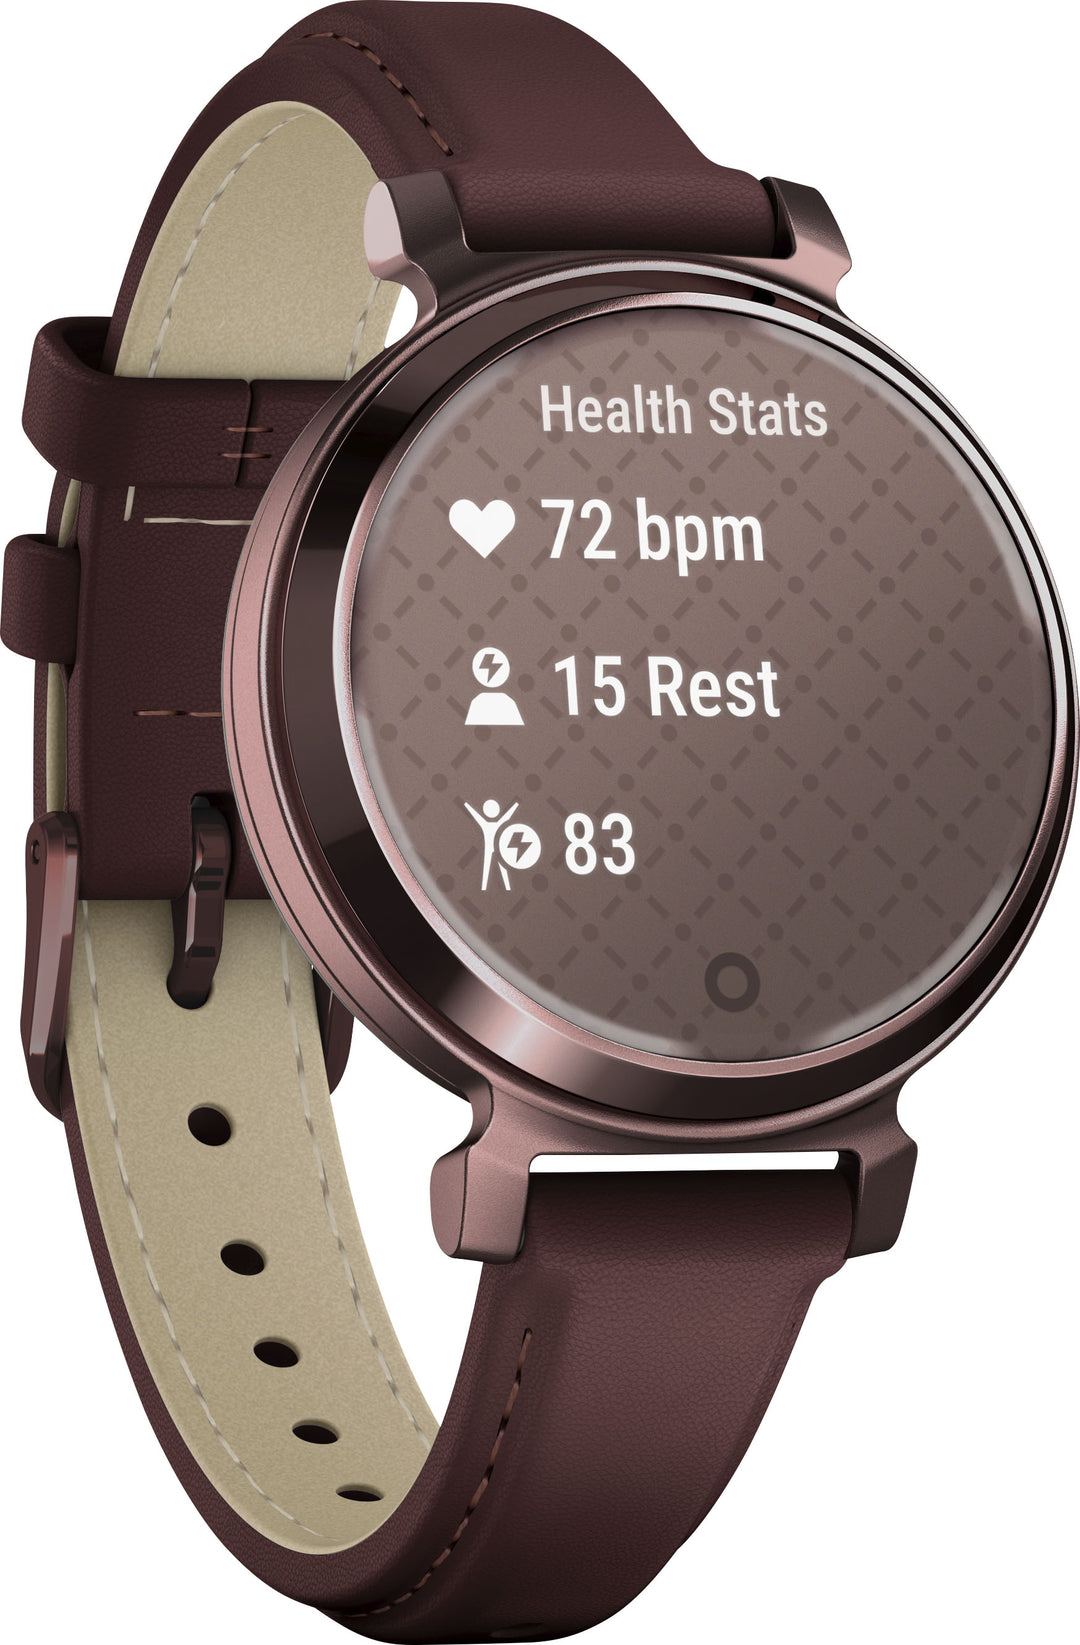 Garmin - Lily 2 Classic Smartwatch 34 mm Anodized Aluminum - Dark Bronze with Mulberry Leather Band_2